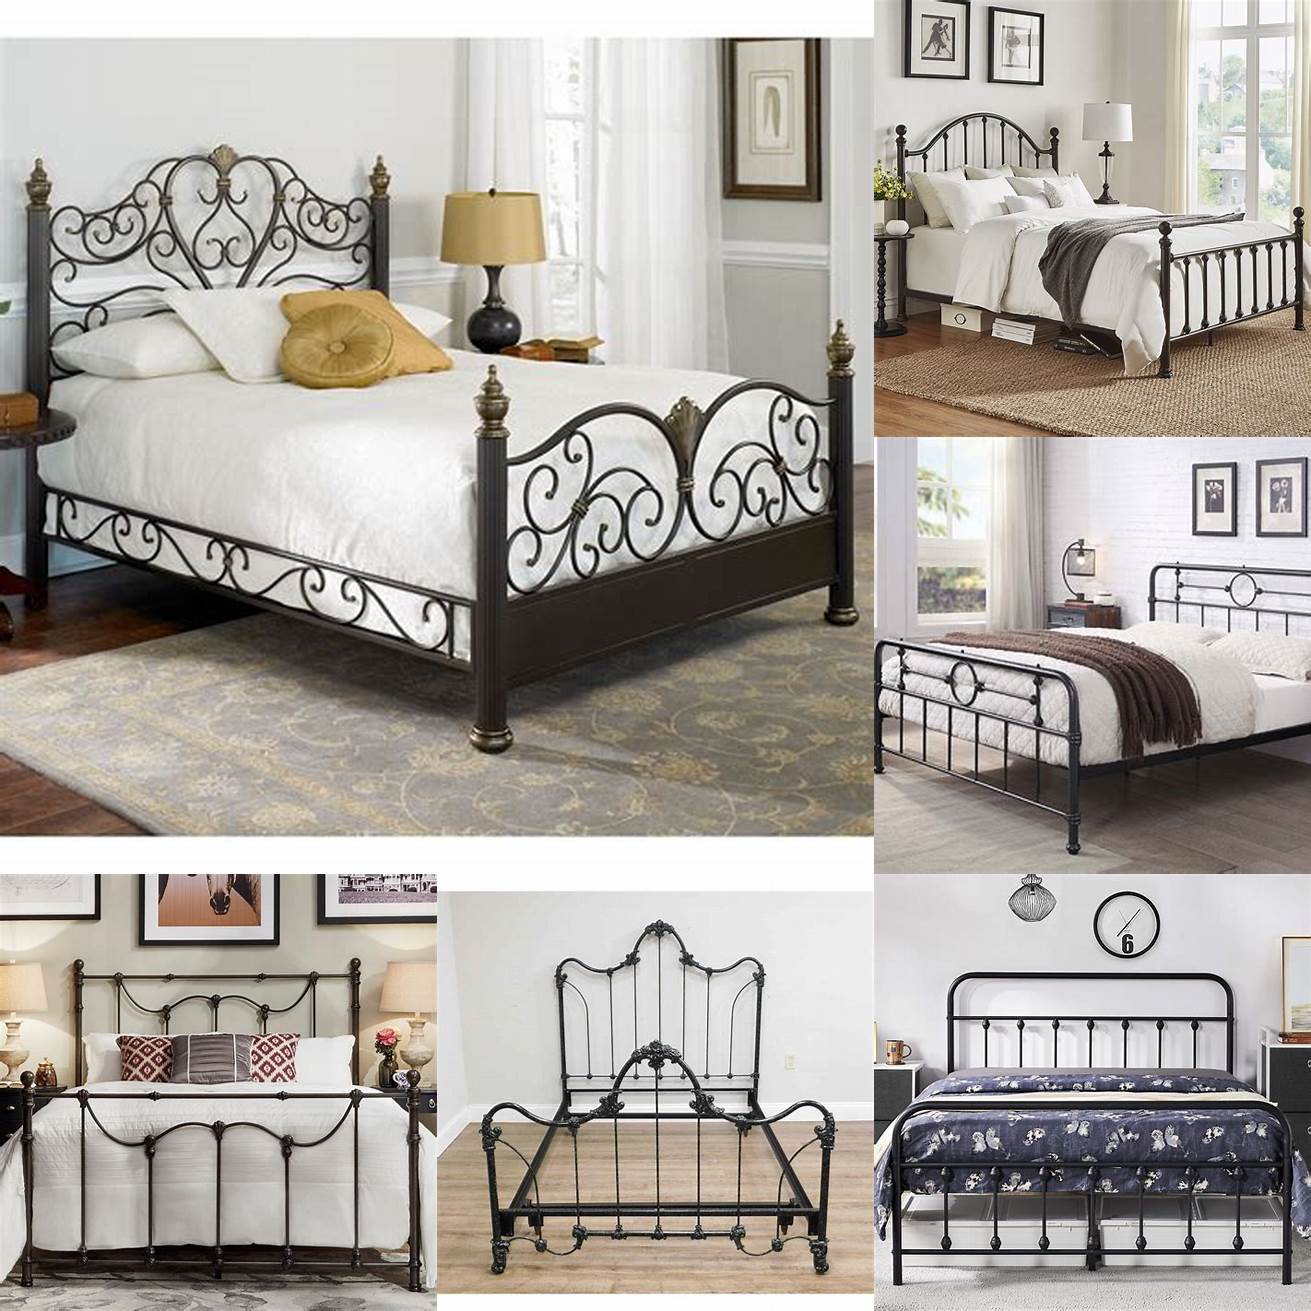 Classic Victorian-style iron bed frame with intricate details